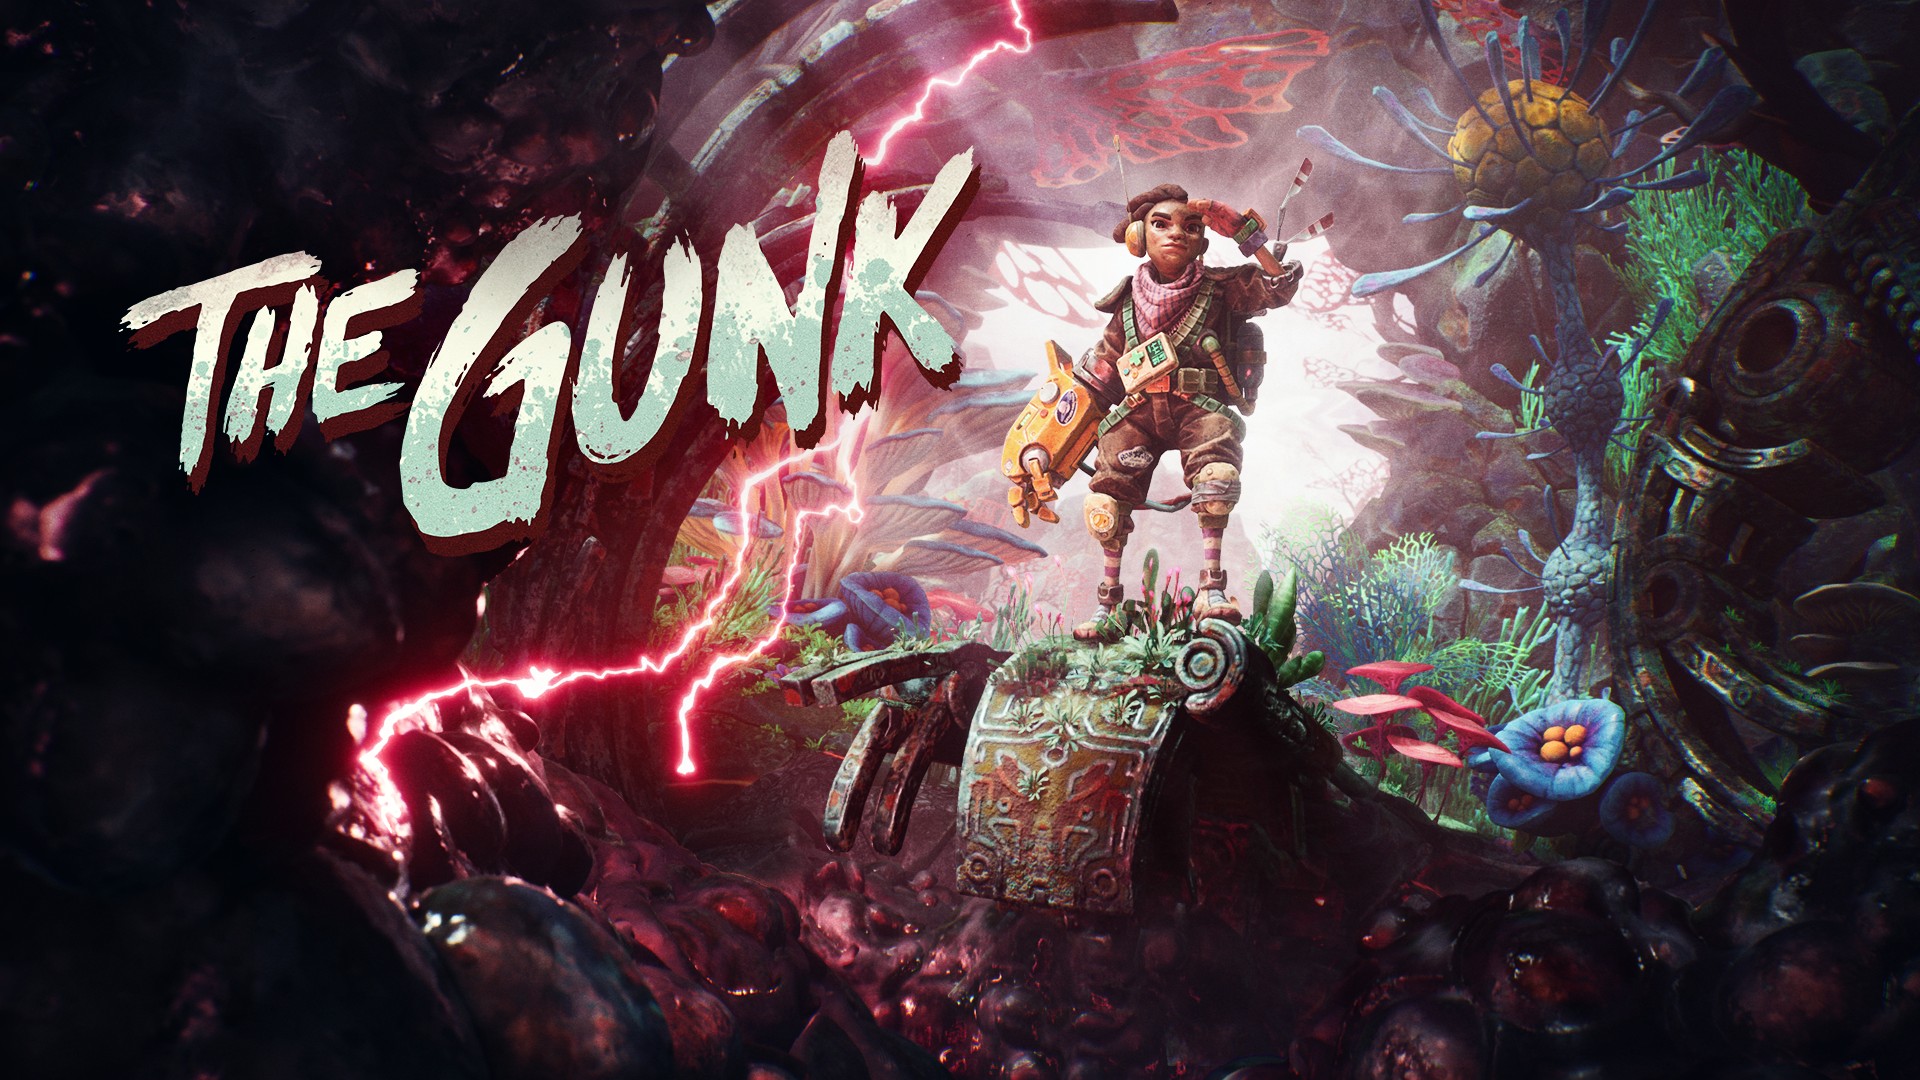 Video For Thunderful’s Gooey Treat for the Holidays: Play The Gunk Today with Xbox Game Pass